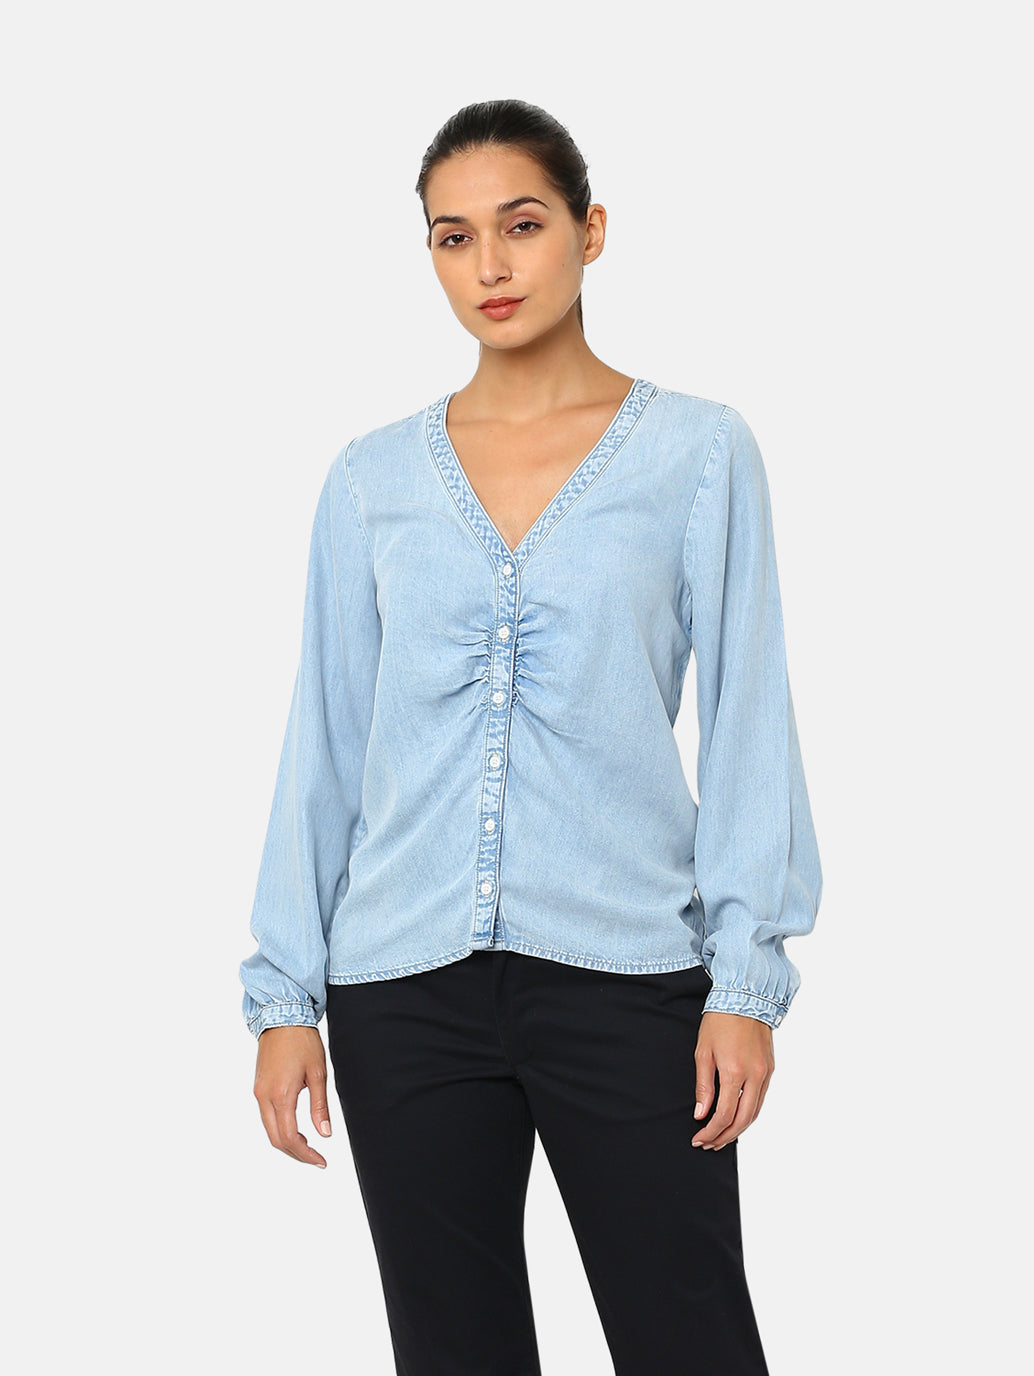 Women's Solid Blue V Neck Lace Top